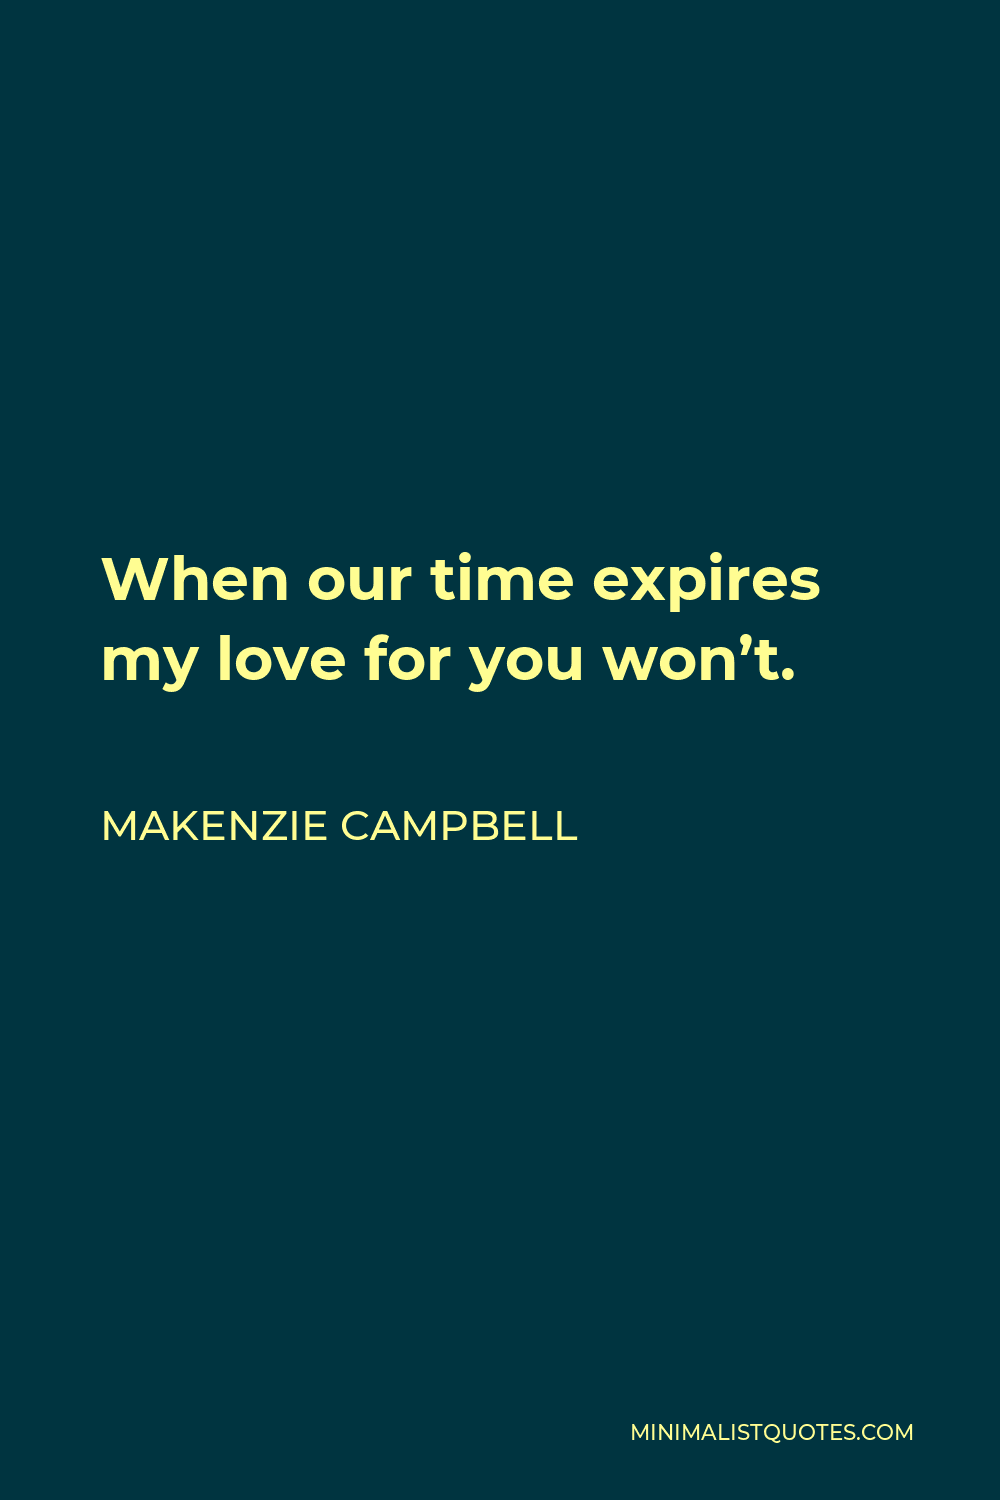 Makenzie Campbell Quote - When our time expires my love for you won’t.